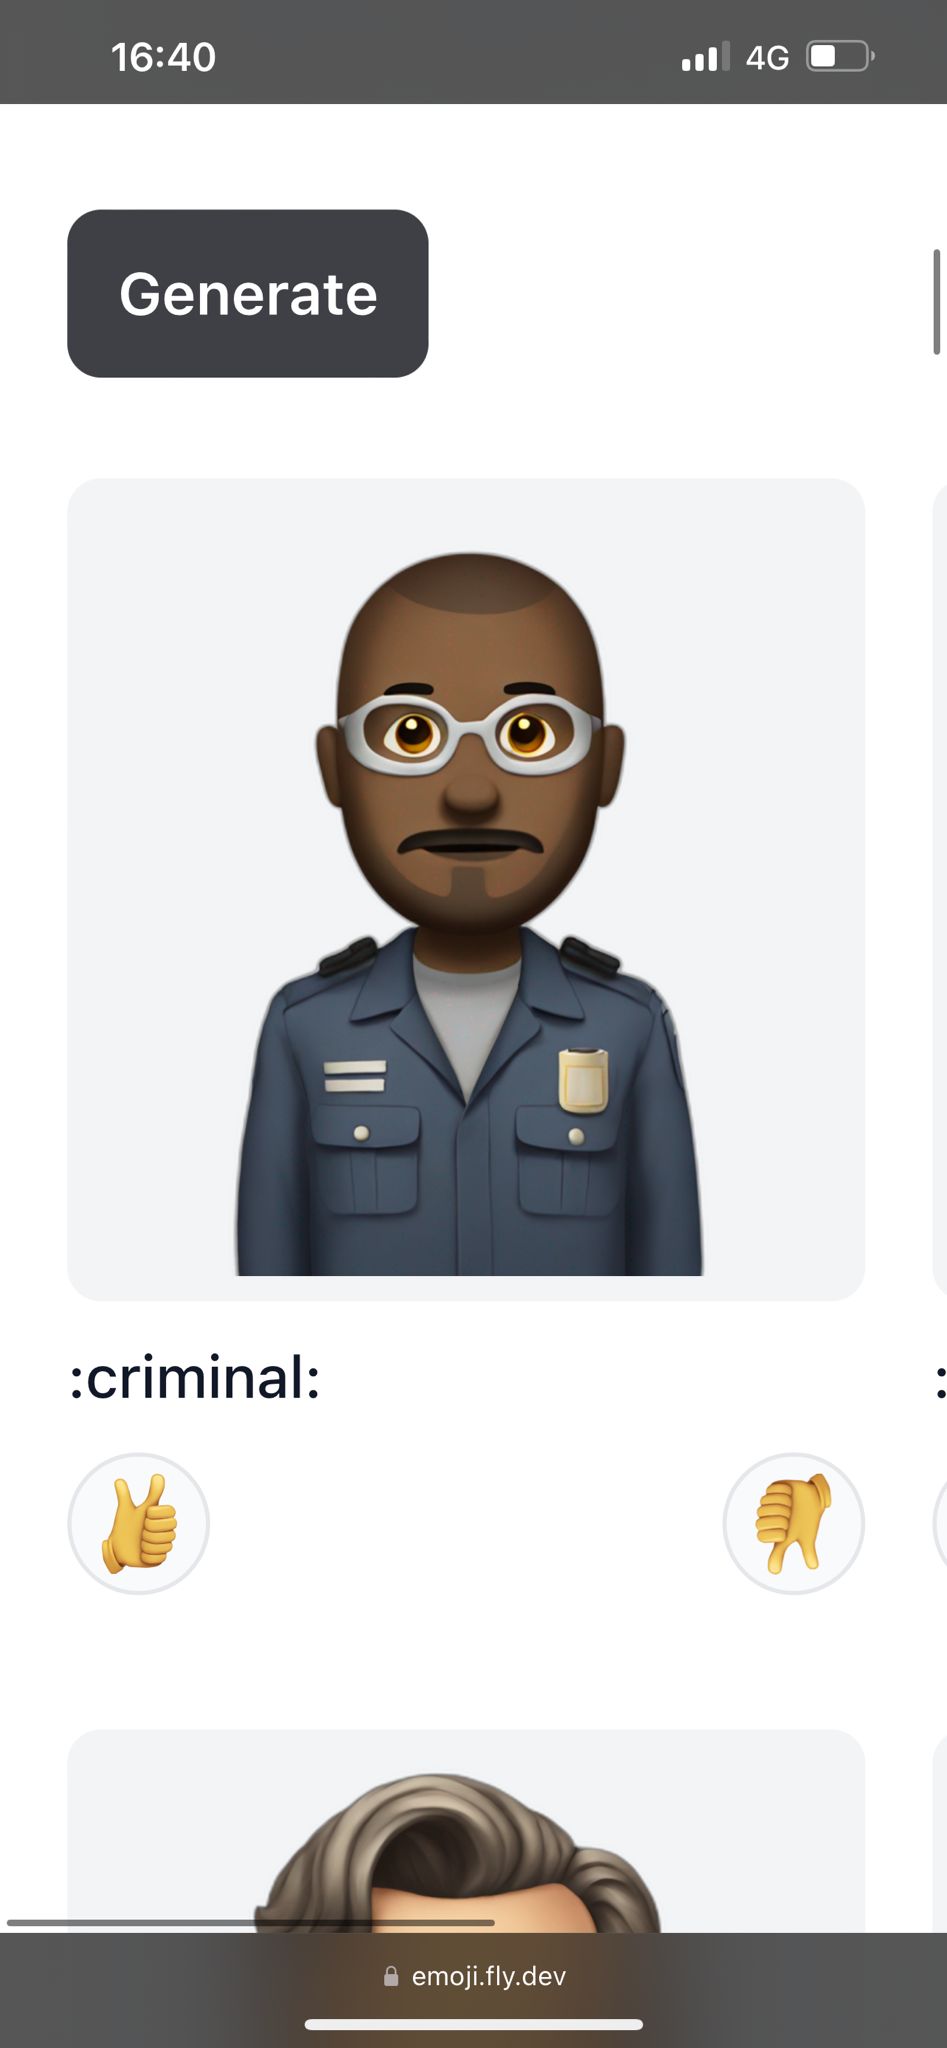 Screenshot of an emoji generated by the EmojiGen tool for the prompt 'criminal' showing a Black emoji character in something reminiscent of a police uniform